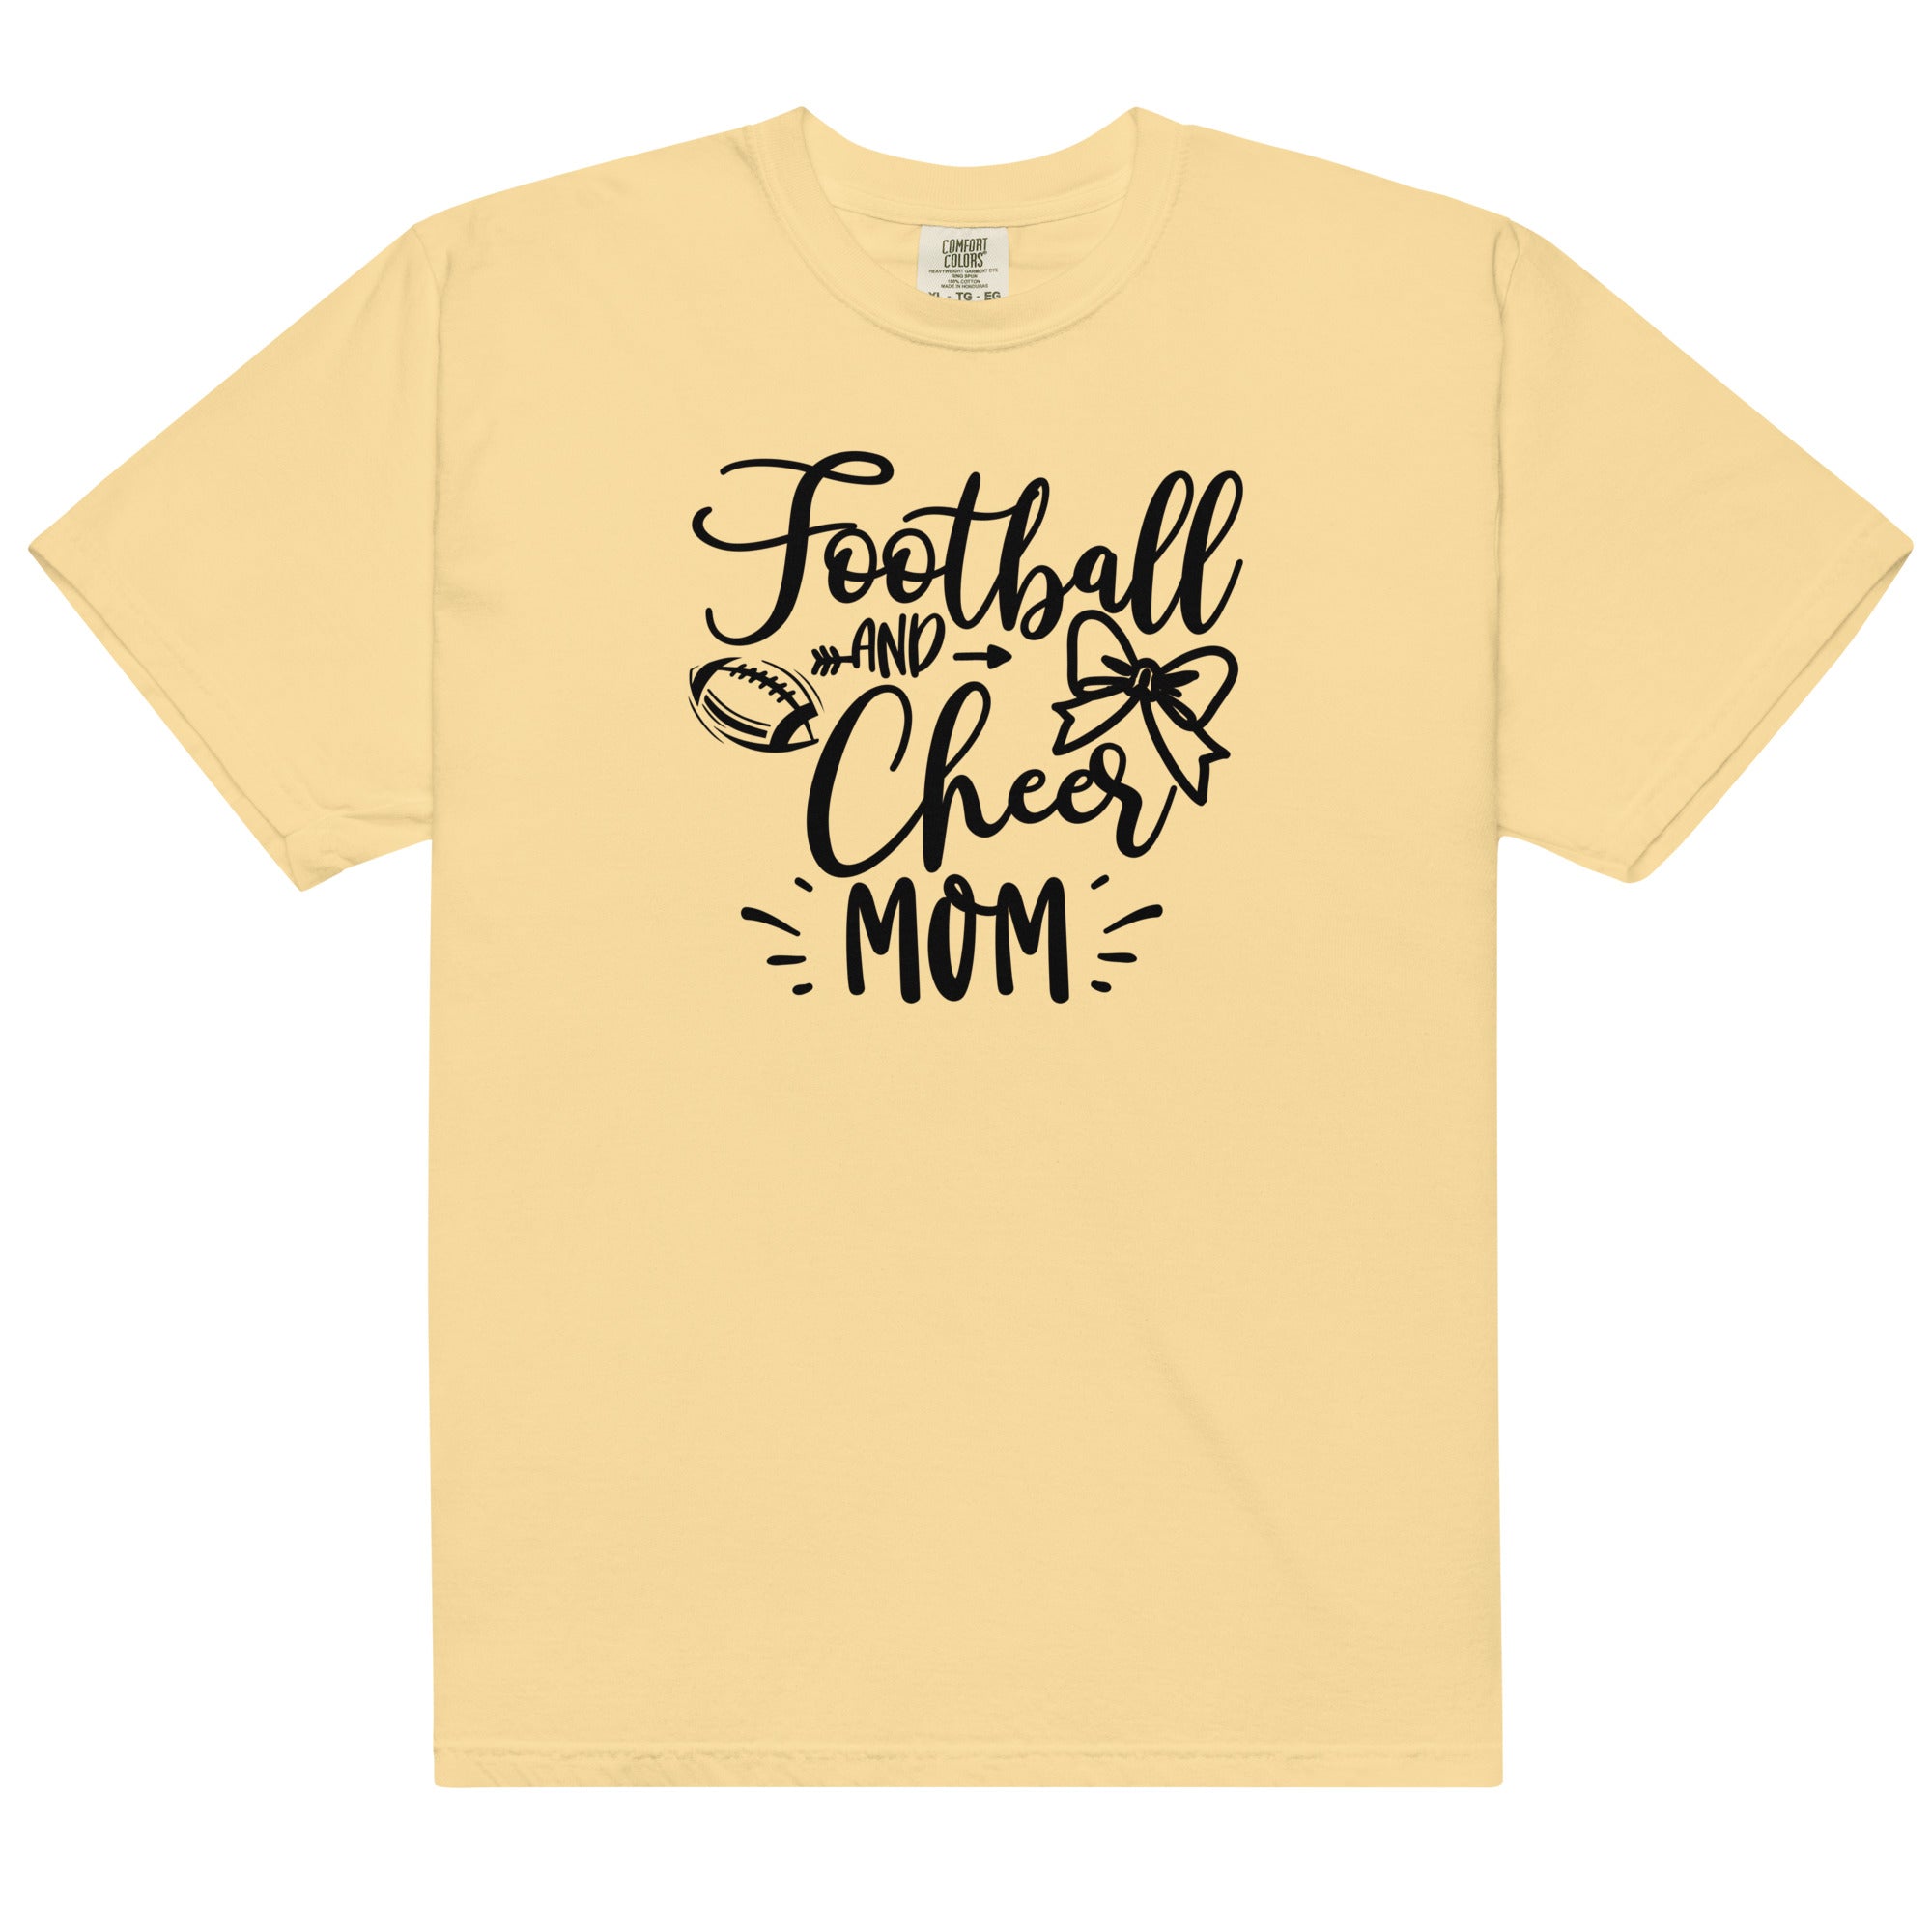 Football and Cheer Mom Short Sleeve T-Shirt on Comfort Colors